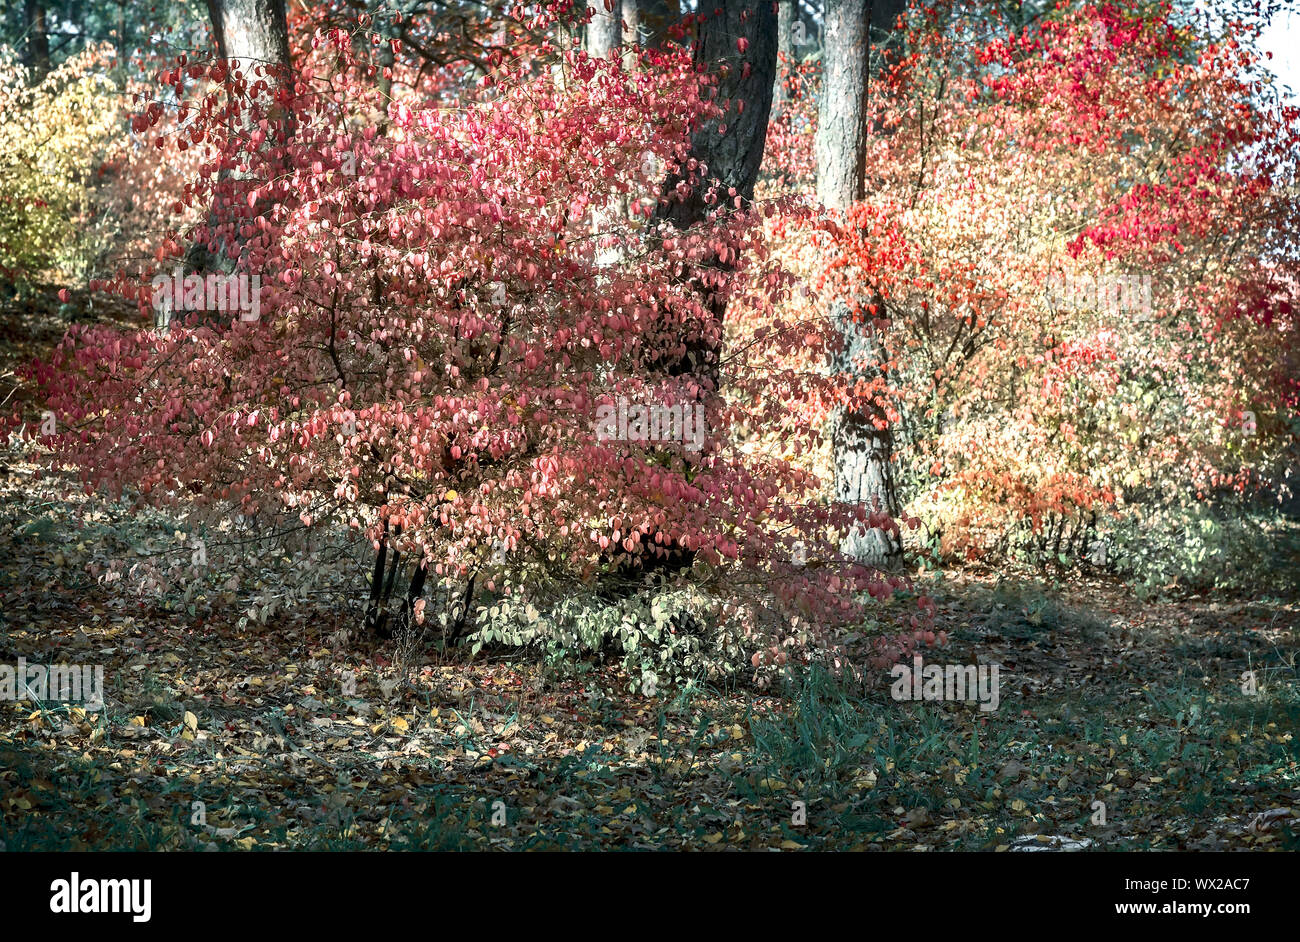 Autumn landscape in the forest with a shrub with red leaves. Stock Photo